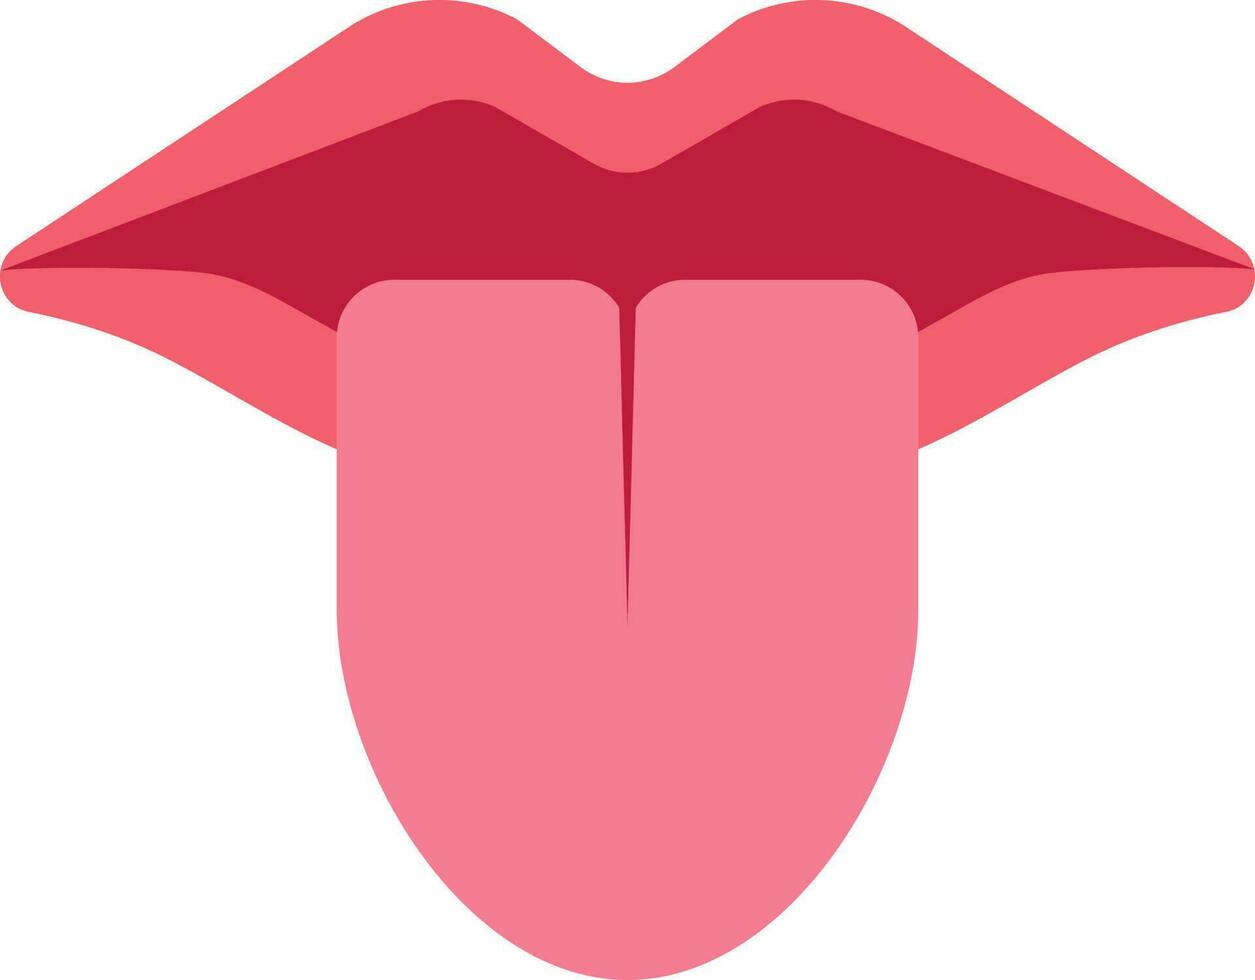 Flat Tongue With Lips Icon In Red Color. vector